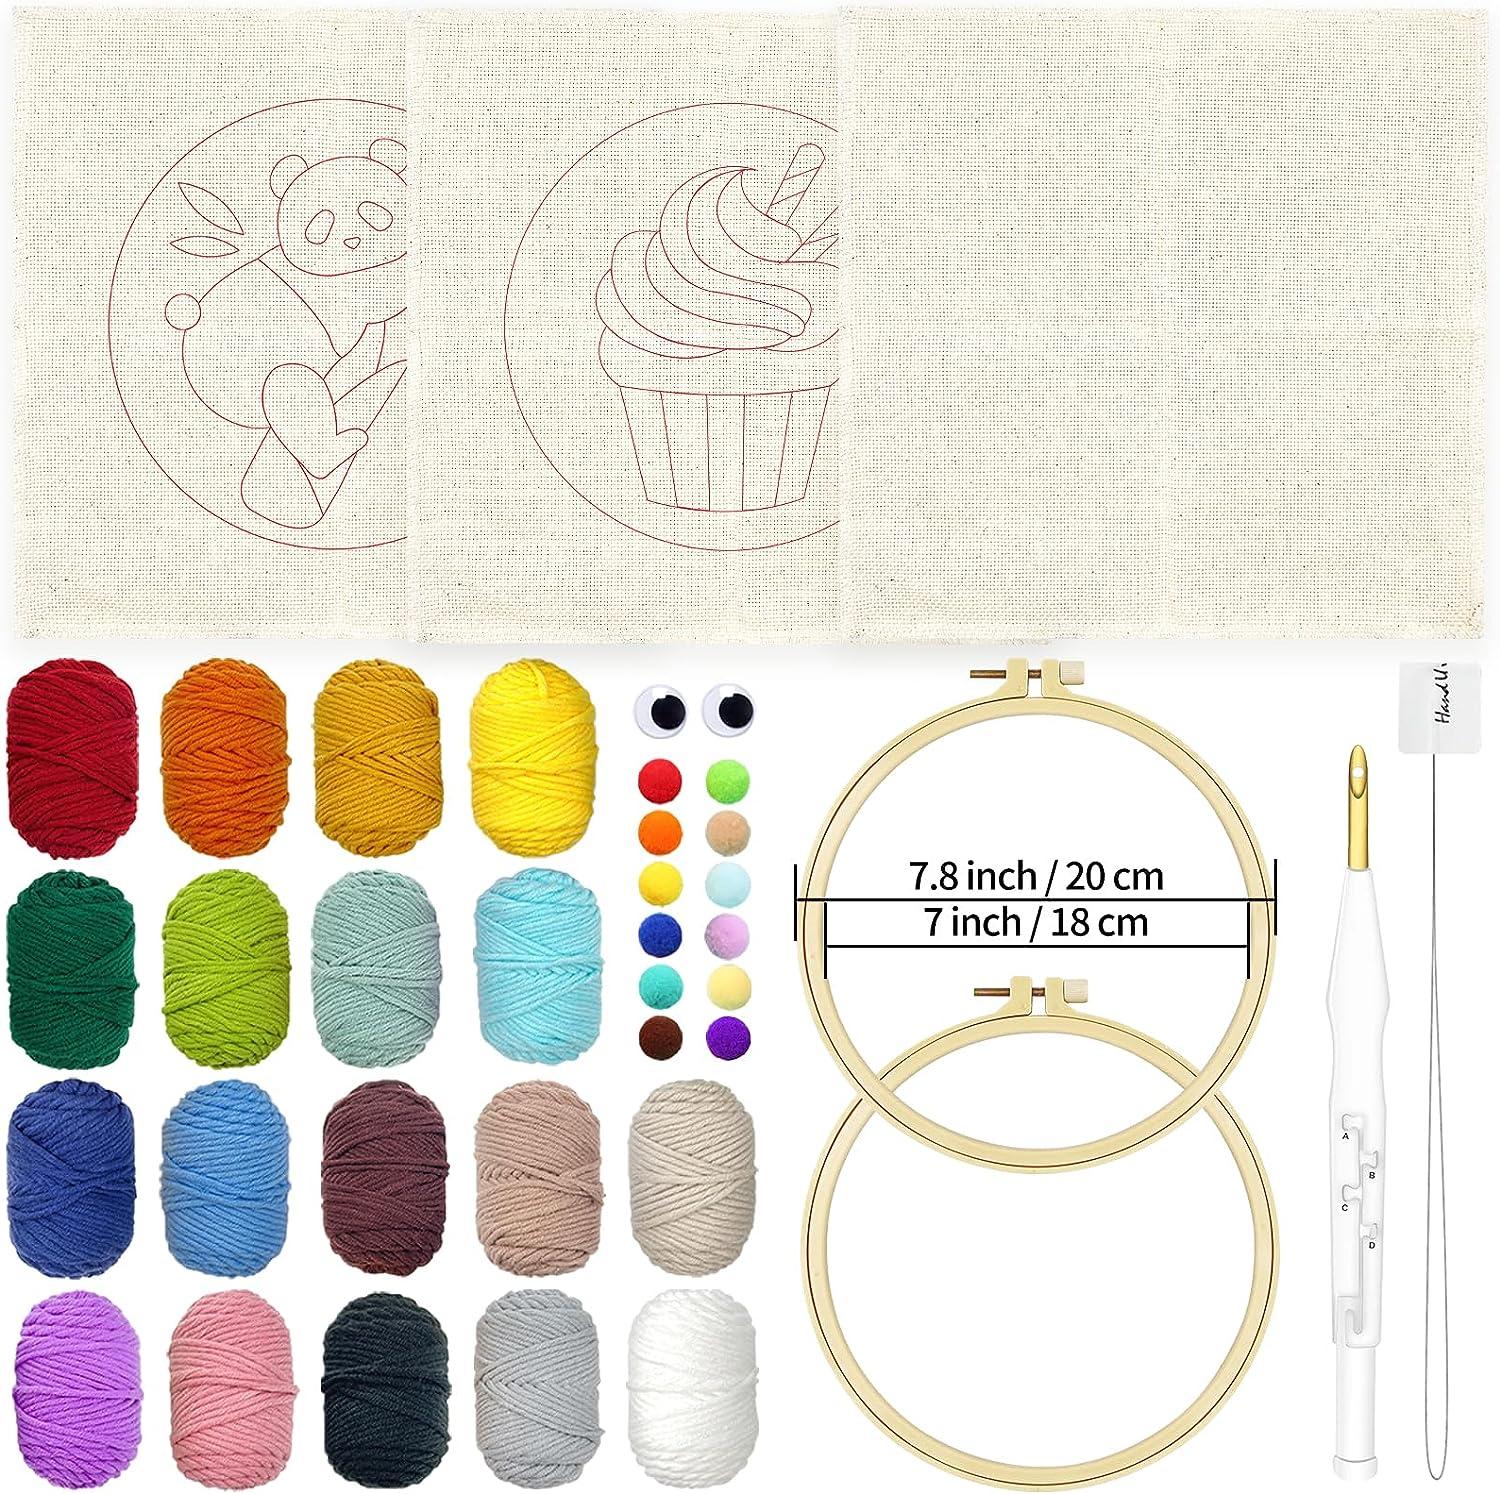  Wool Queen Punch Needle Kit/Landscape Rug Yarn Hooking Beginner  Kit,14''x10'' with Wooden Punch Pen for Kids Adults Craft Gift-Impression  Sunrise : Everything Else